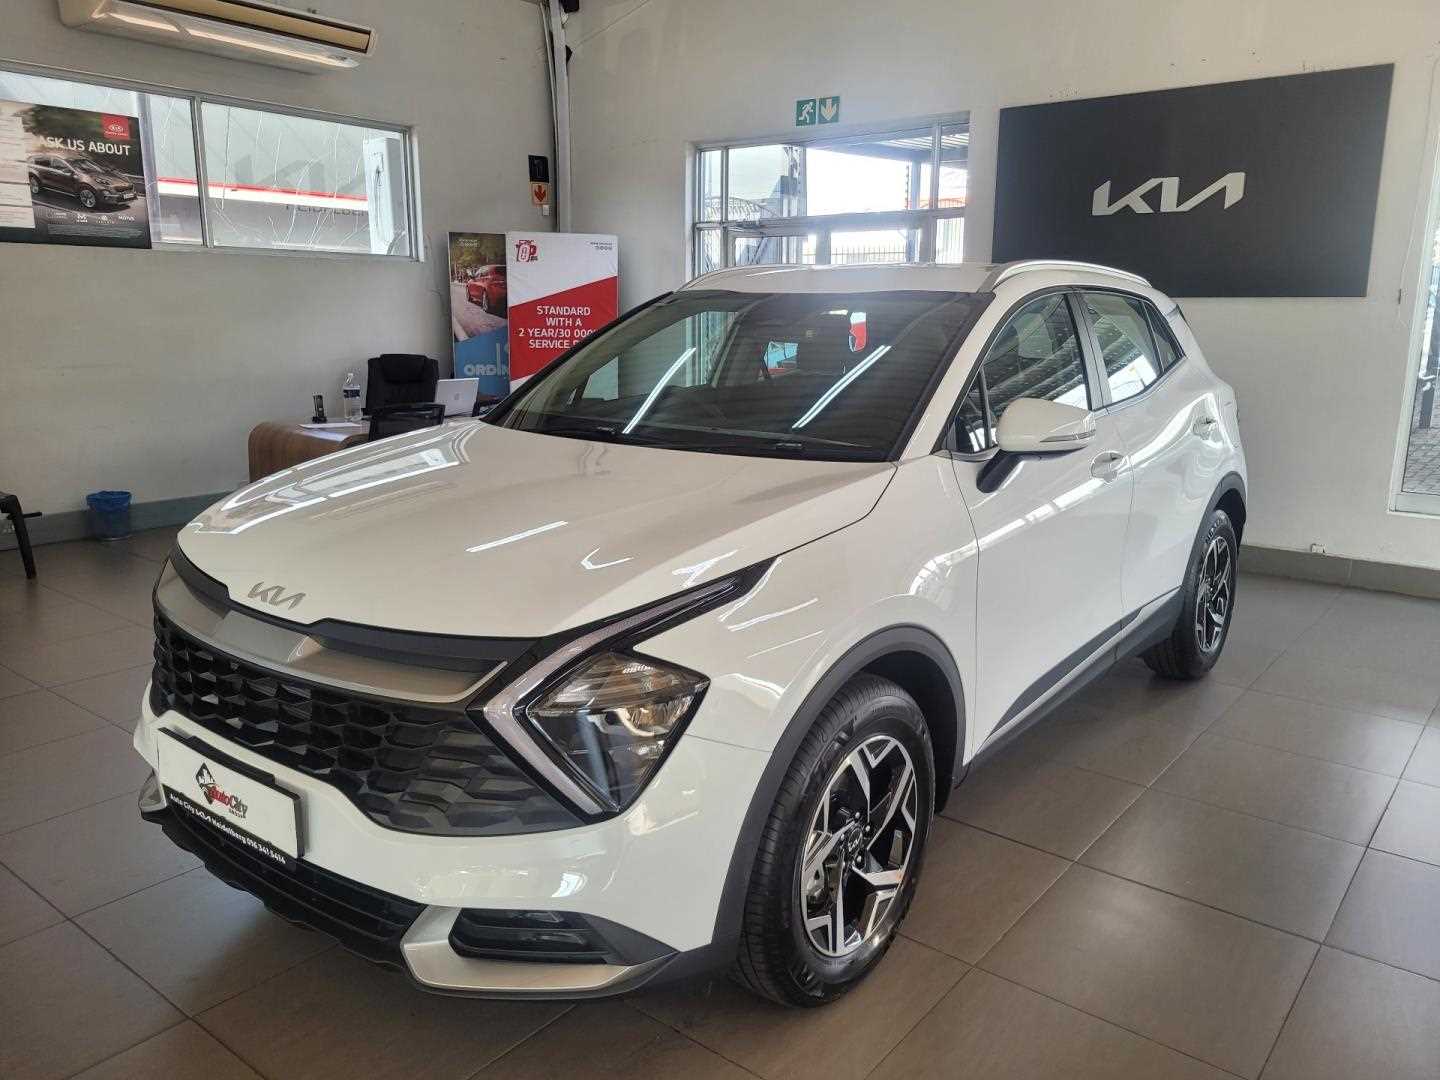 KIA SPORTAGE 1.6 CRDI LX A/T for Sale in South Africa